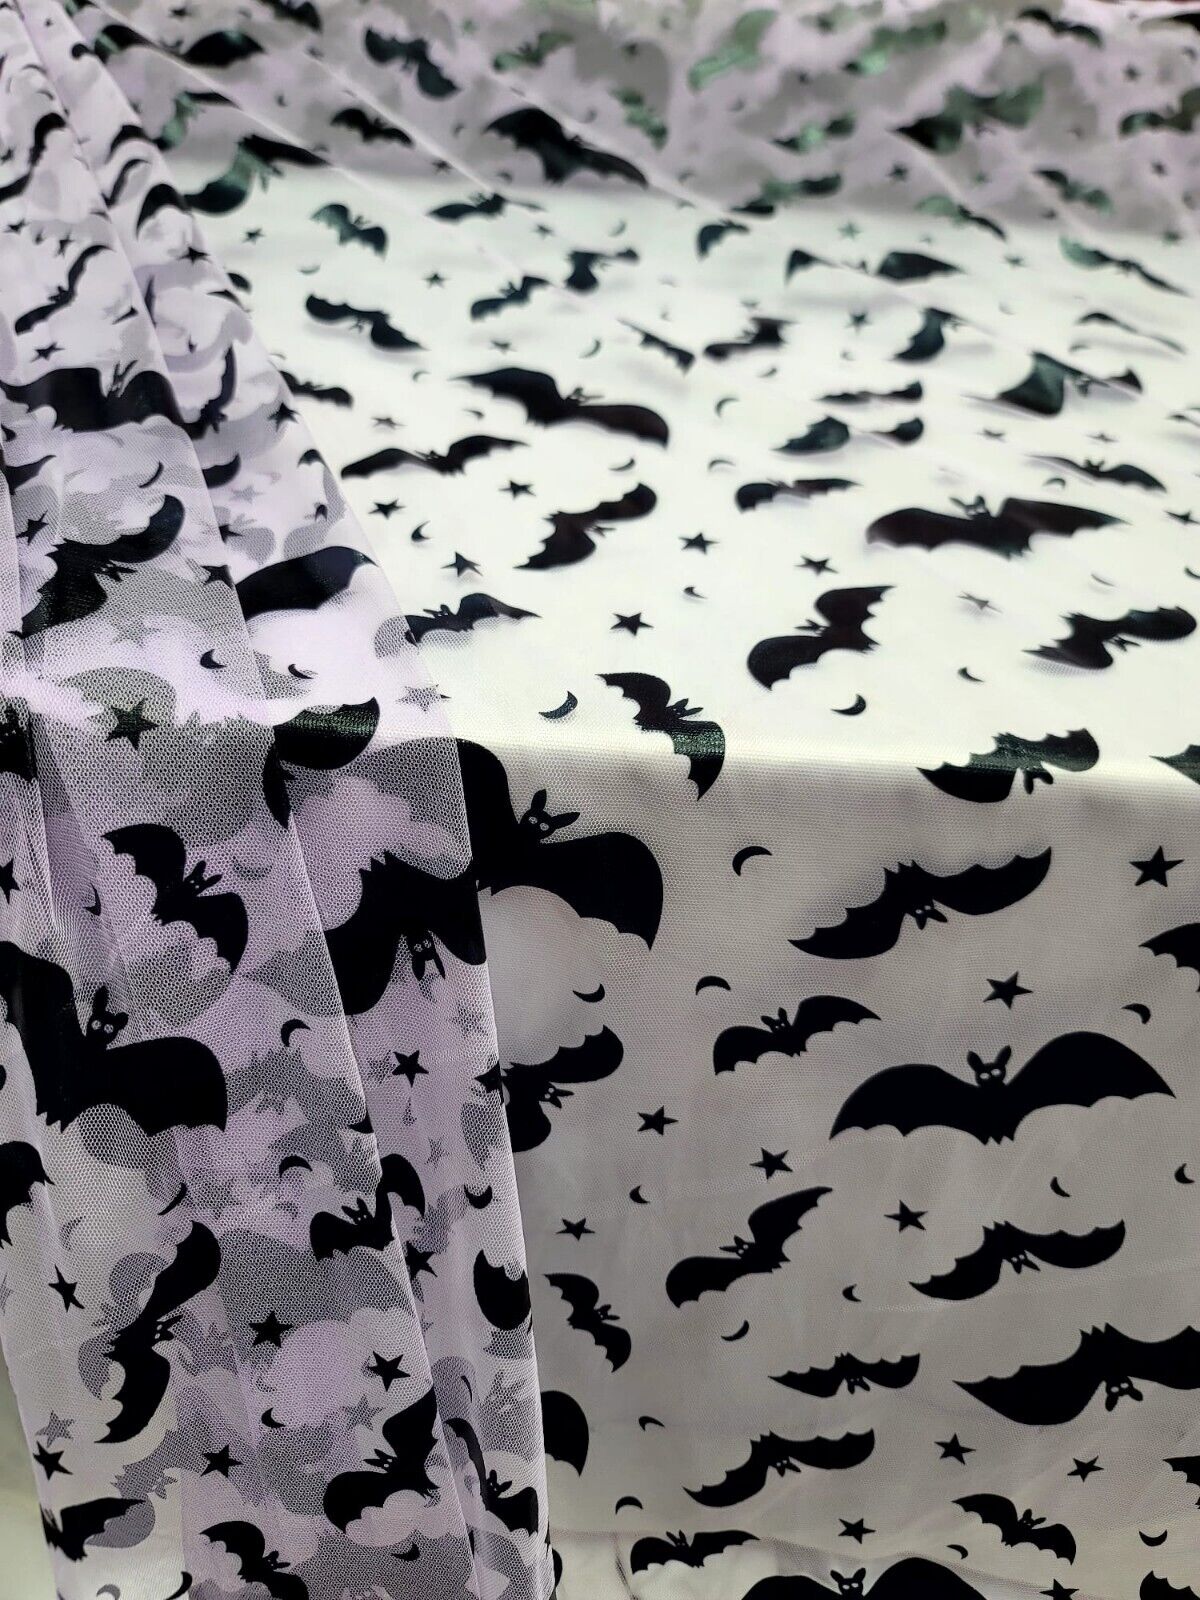 Black Flying Bats On Lavender Mesh Tulle Fabric Sold By The Yard HALLOWEEN